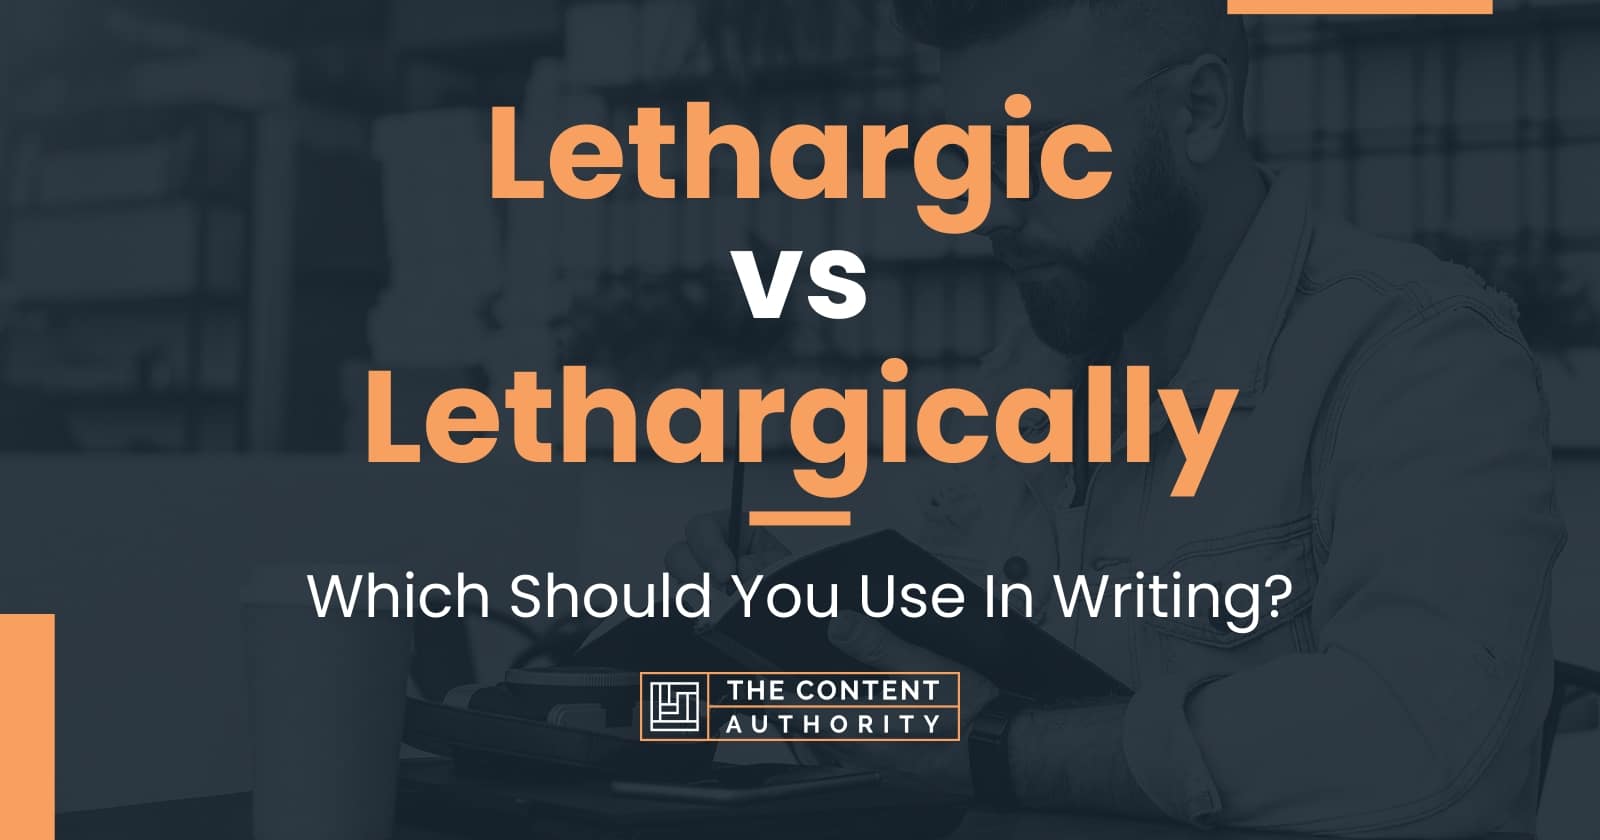 Lethargic vs Lethargically: Which Should You Use In Writing?